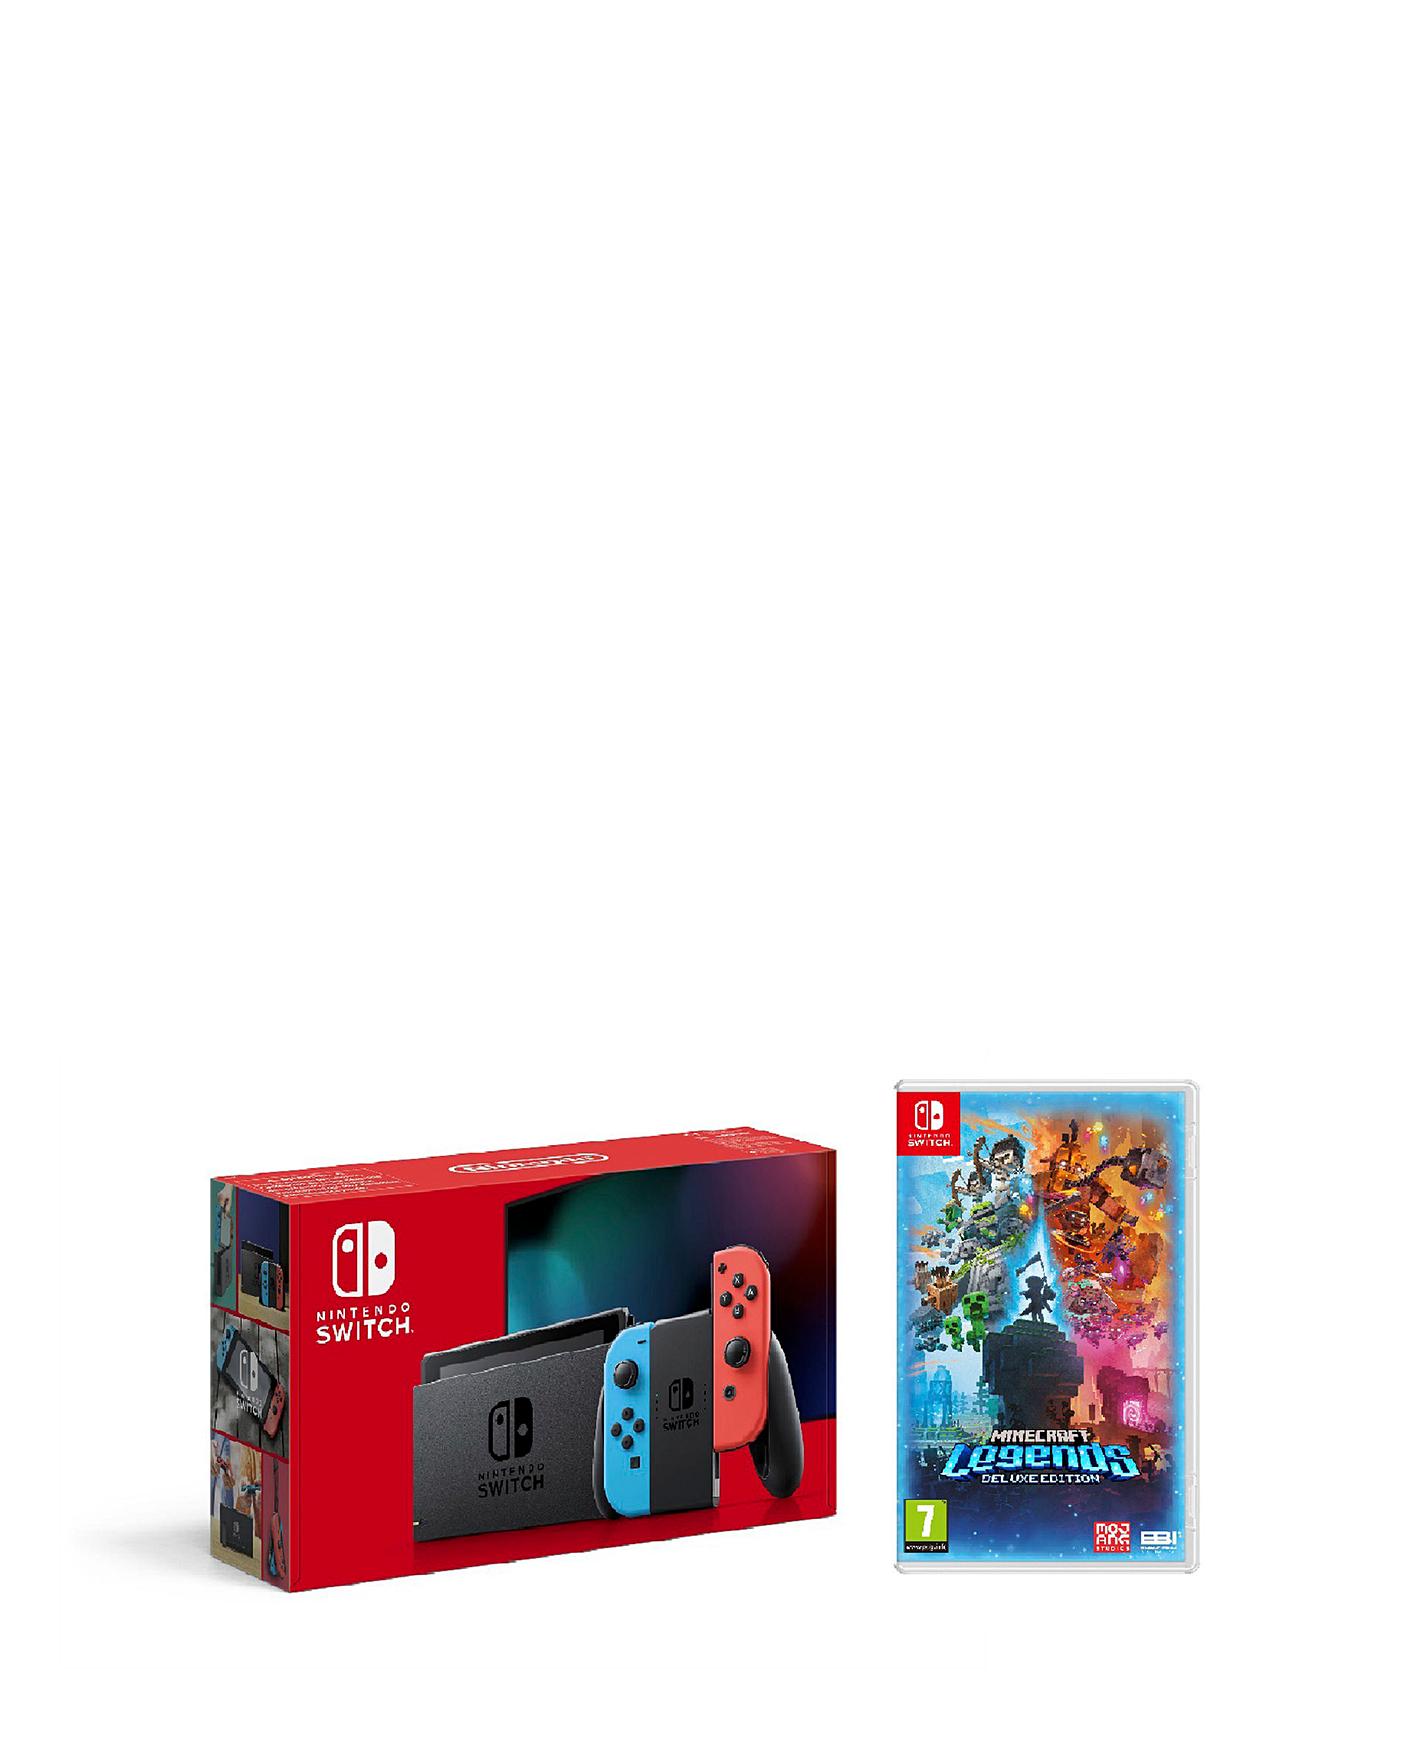 Minecraft Deluxe Collection for Nintendo Switch - Nintendo Official Site